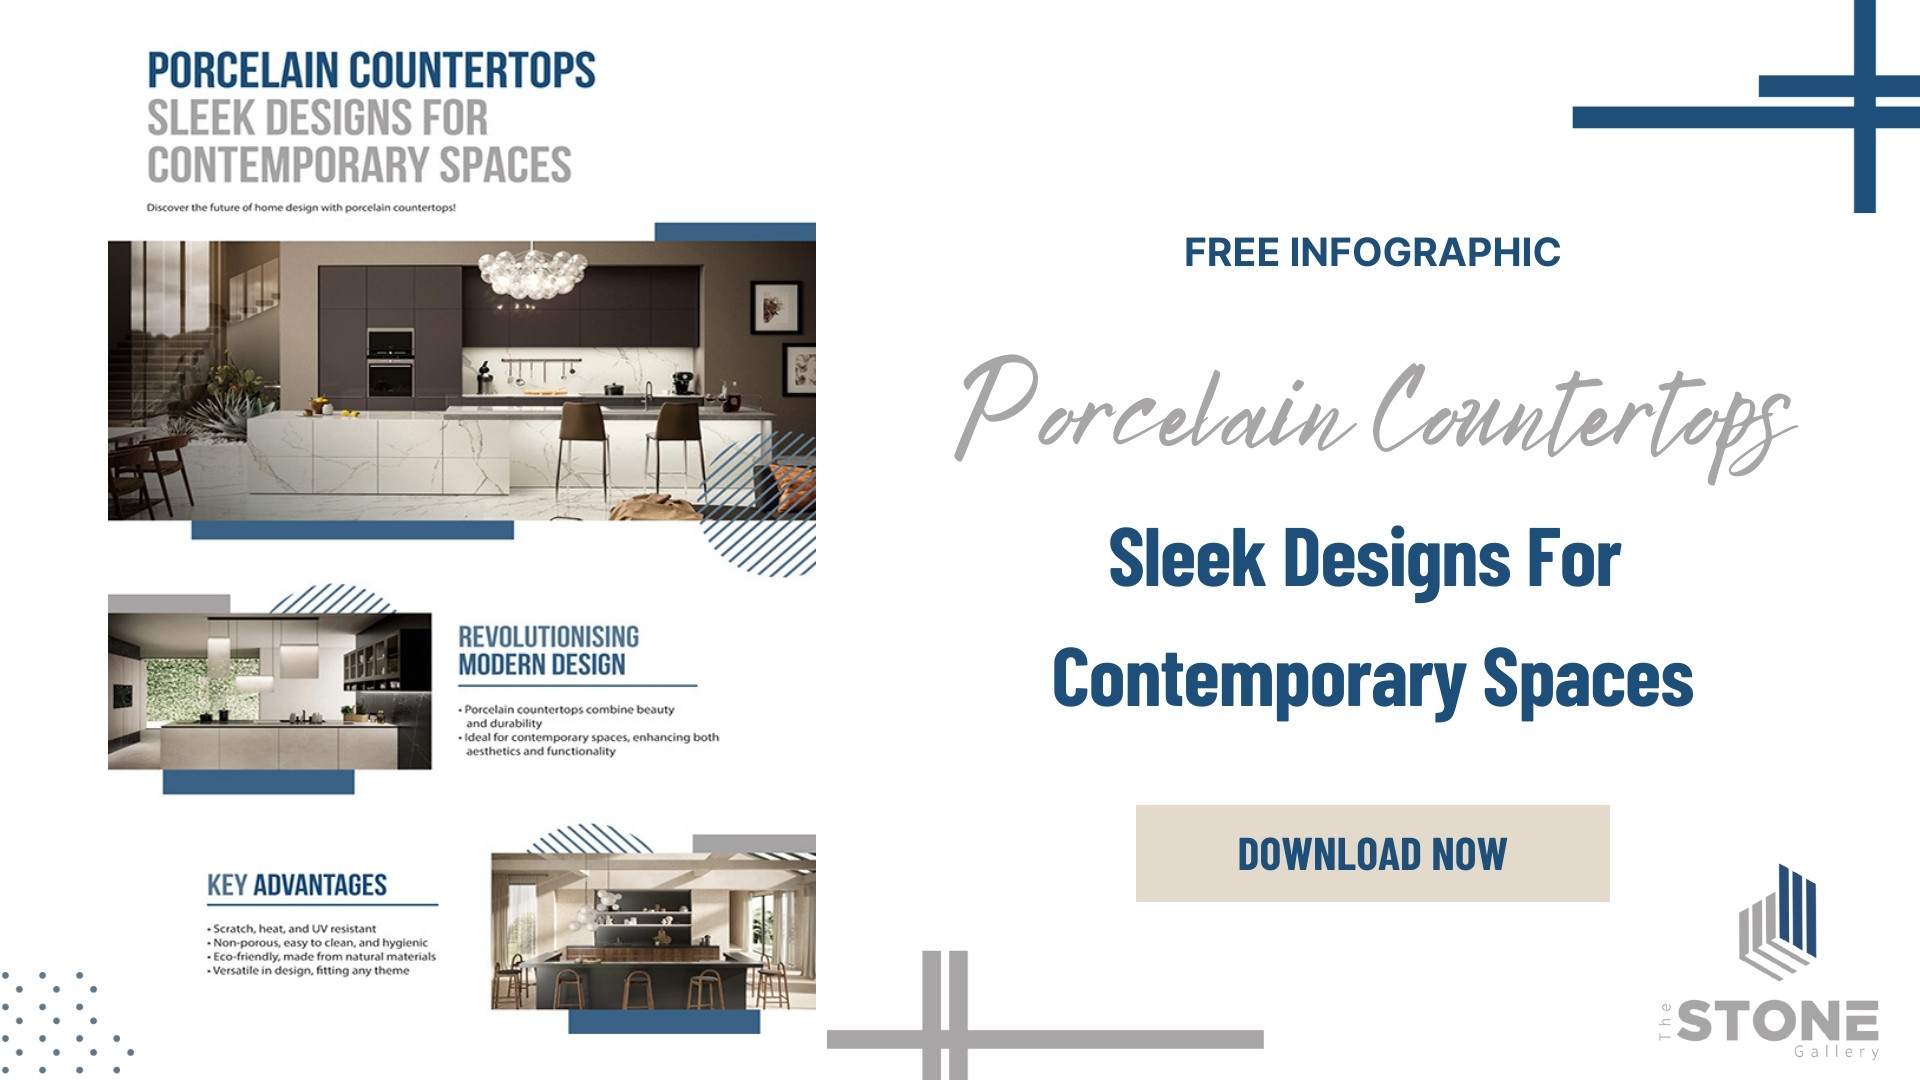 Porcelain Countertops - Sleek Designs For Contemporary Spaces - Infographic - SM - The Stone Gallery